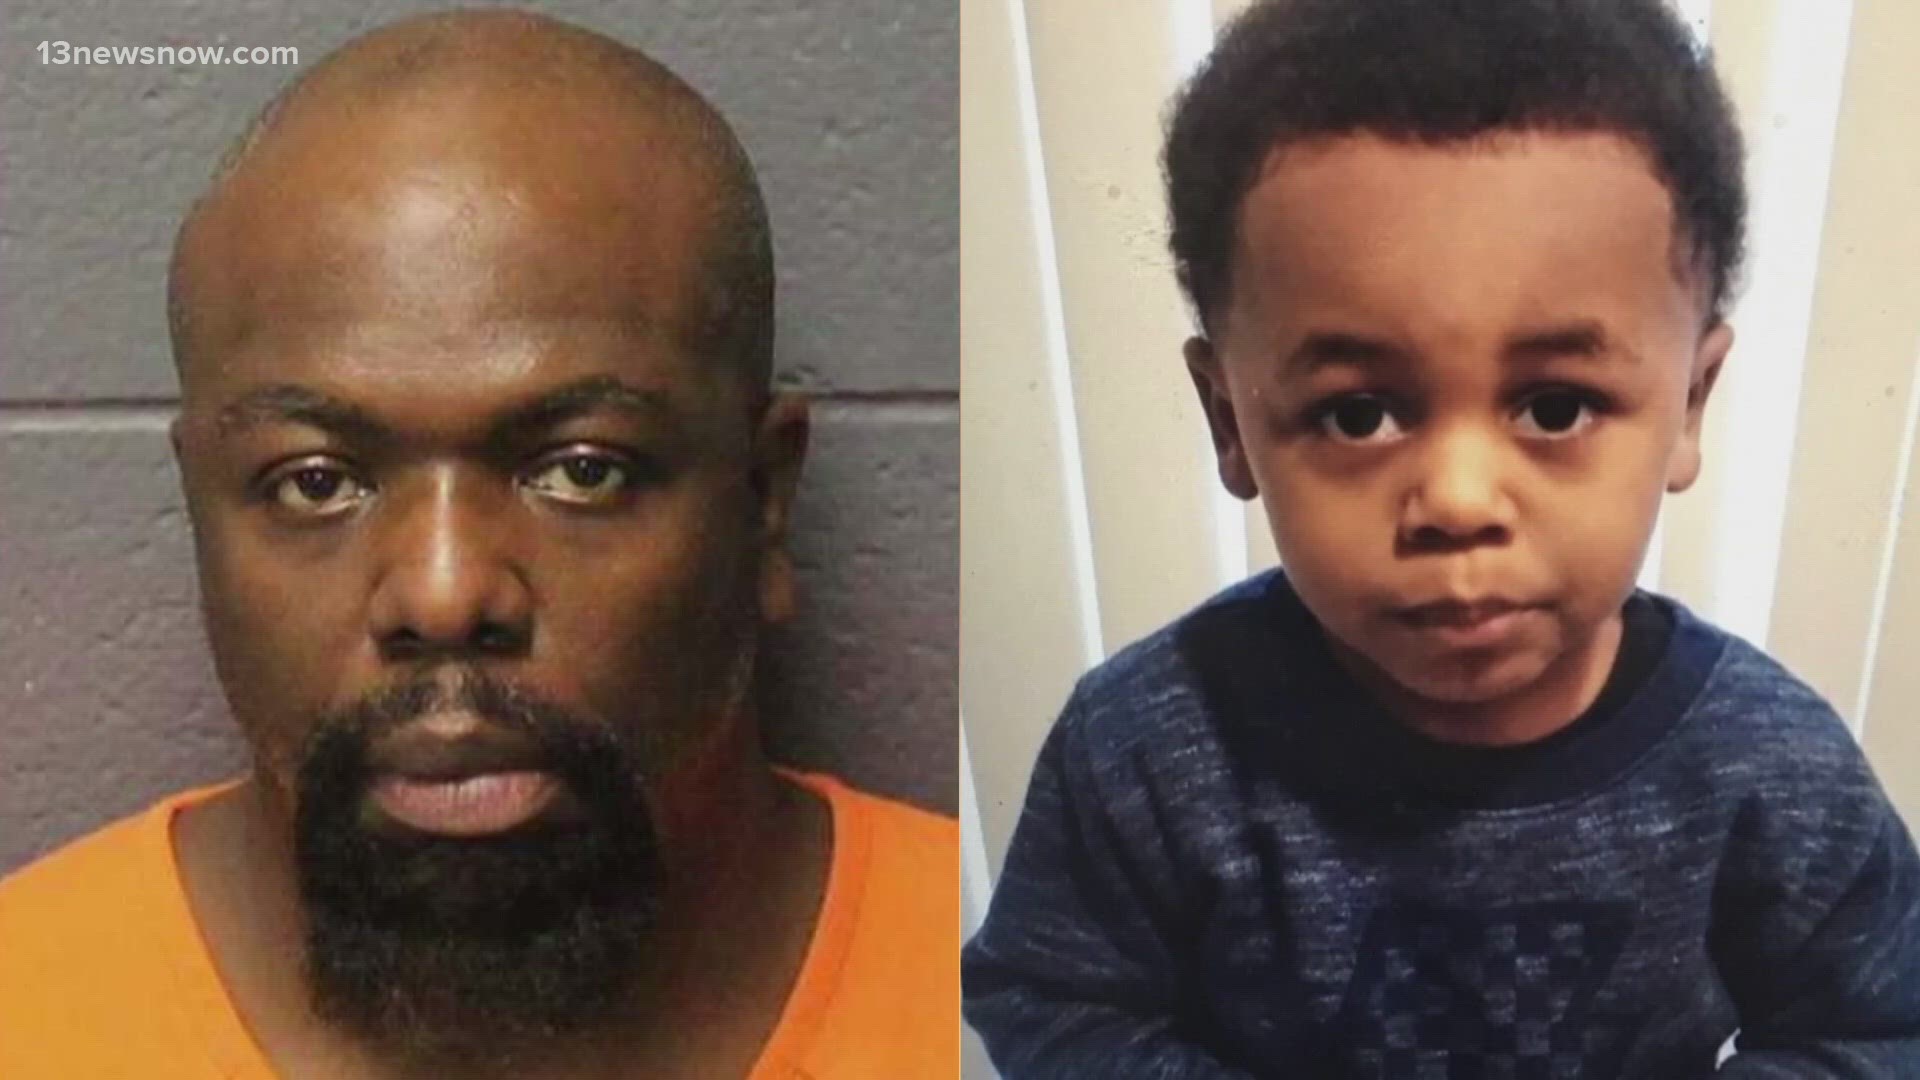 He's the father accused of murdering his young son Codi and allegedly concealing the little boy's body.